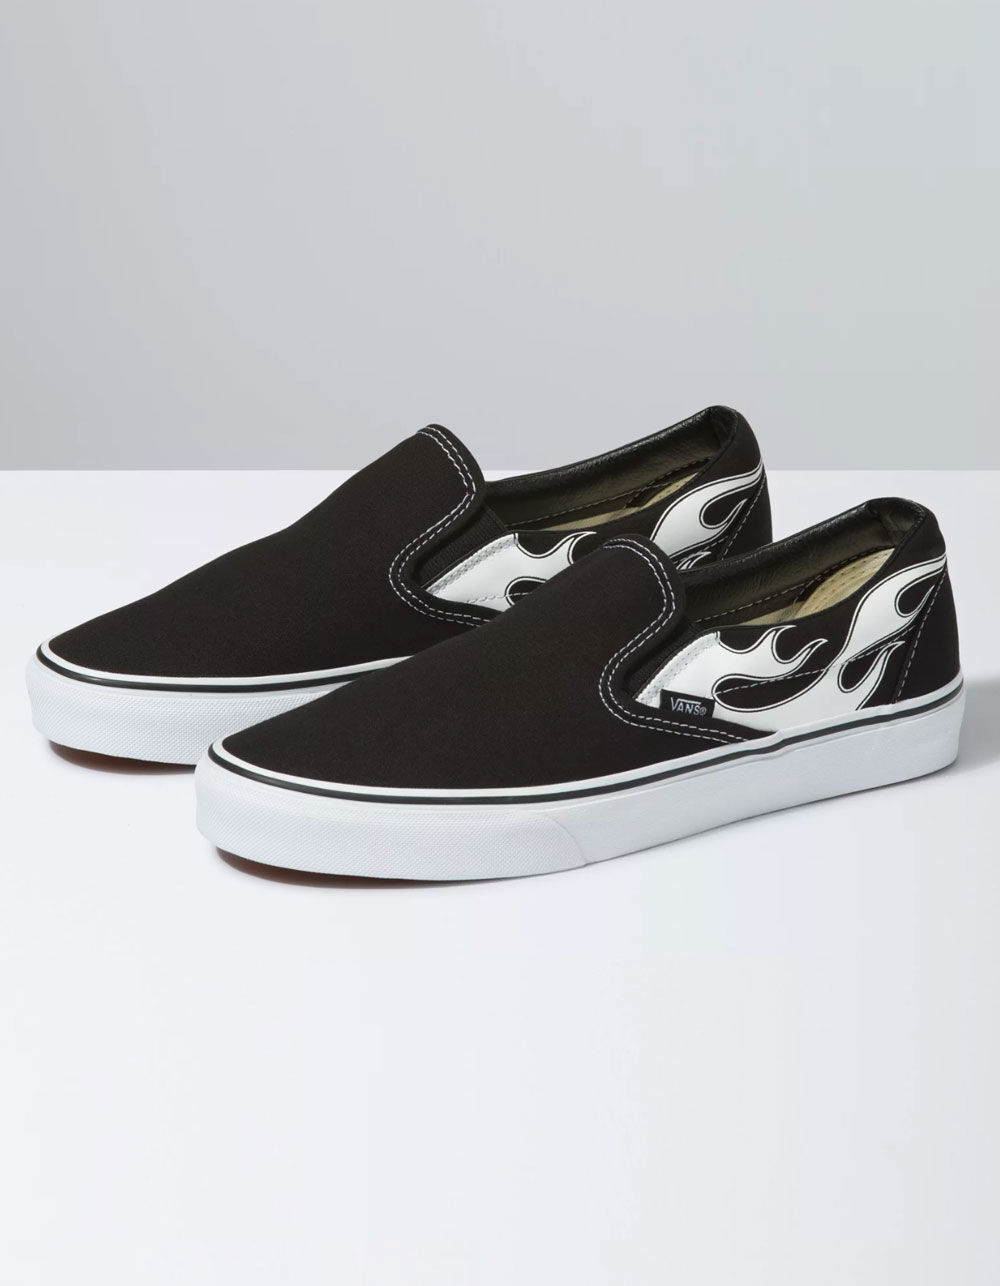 VANS Flame Classic Slip-On Shoes